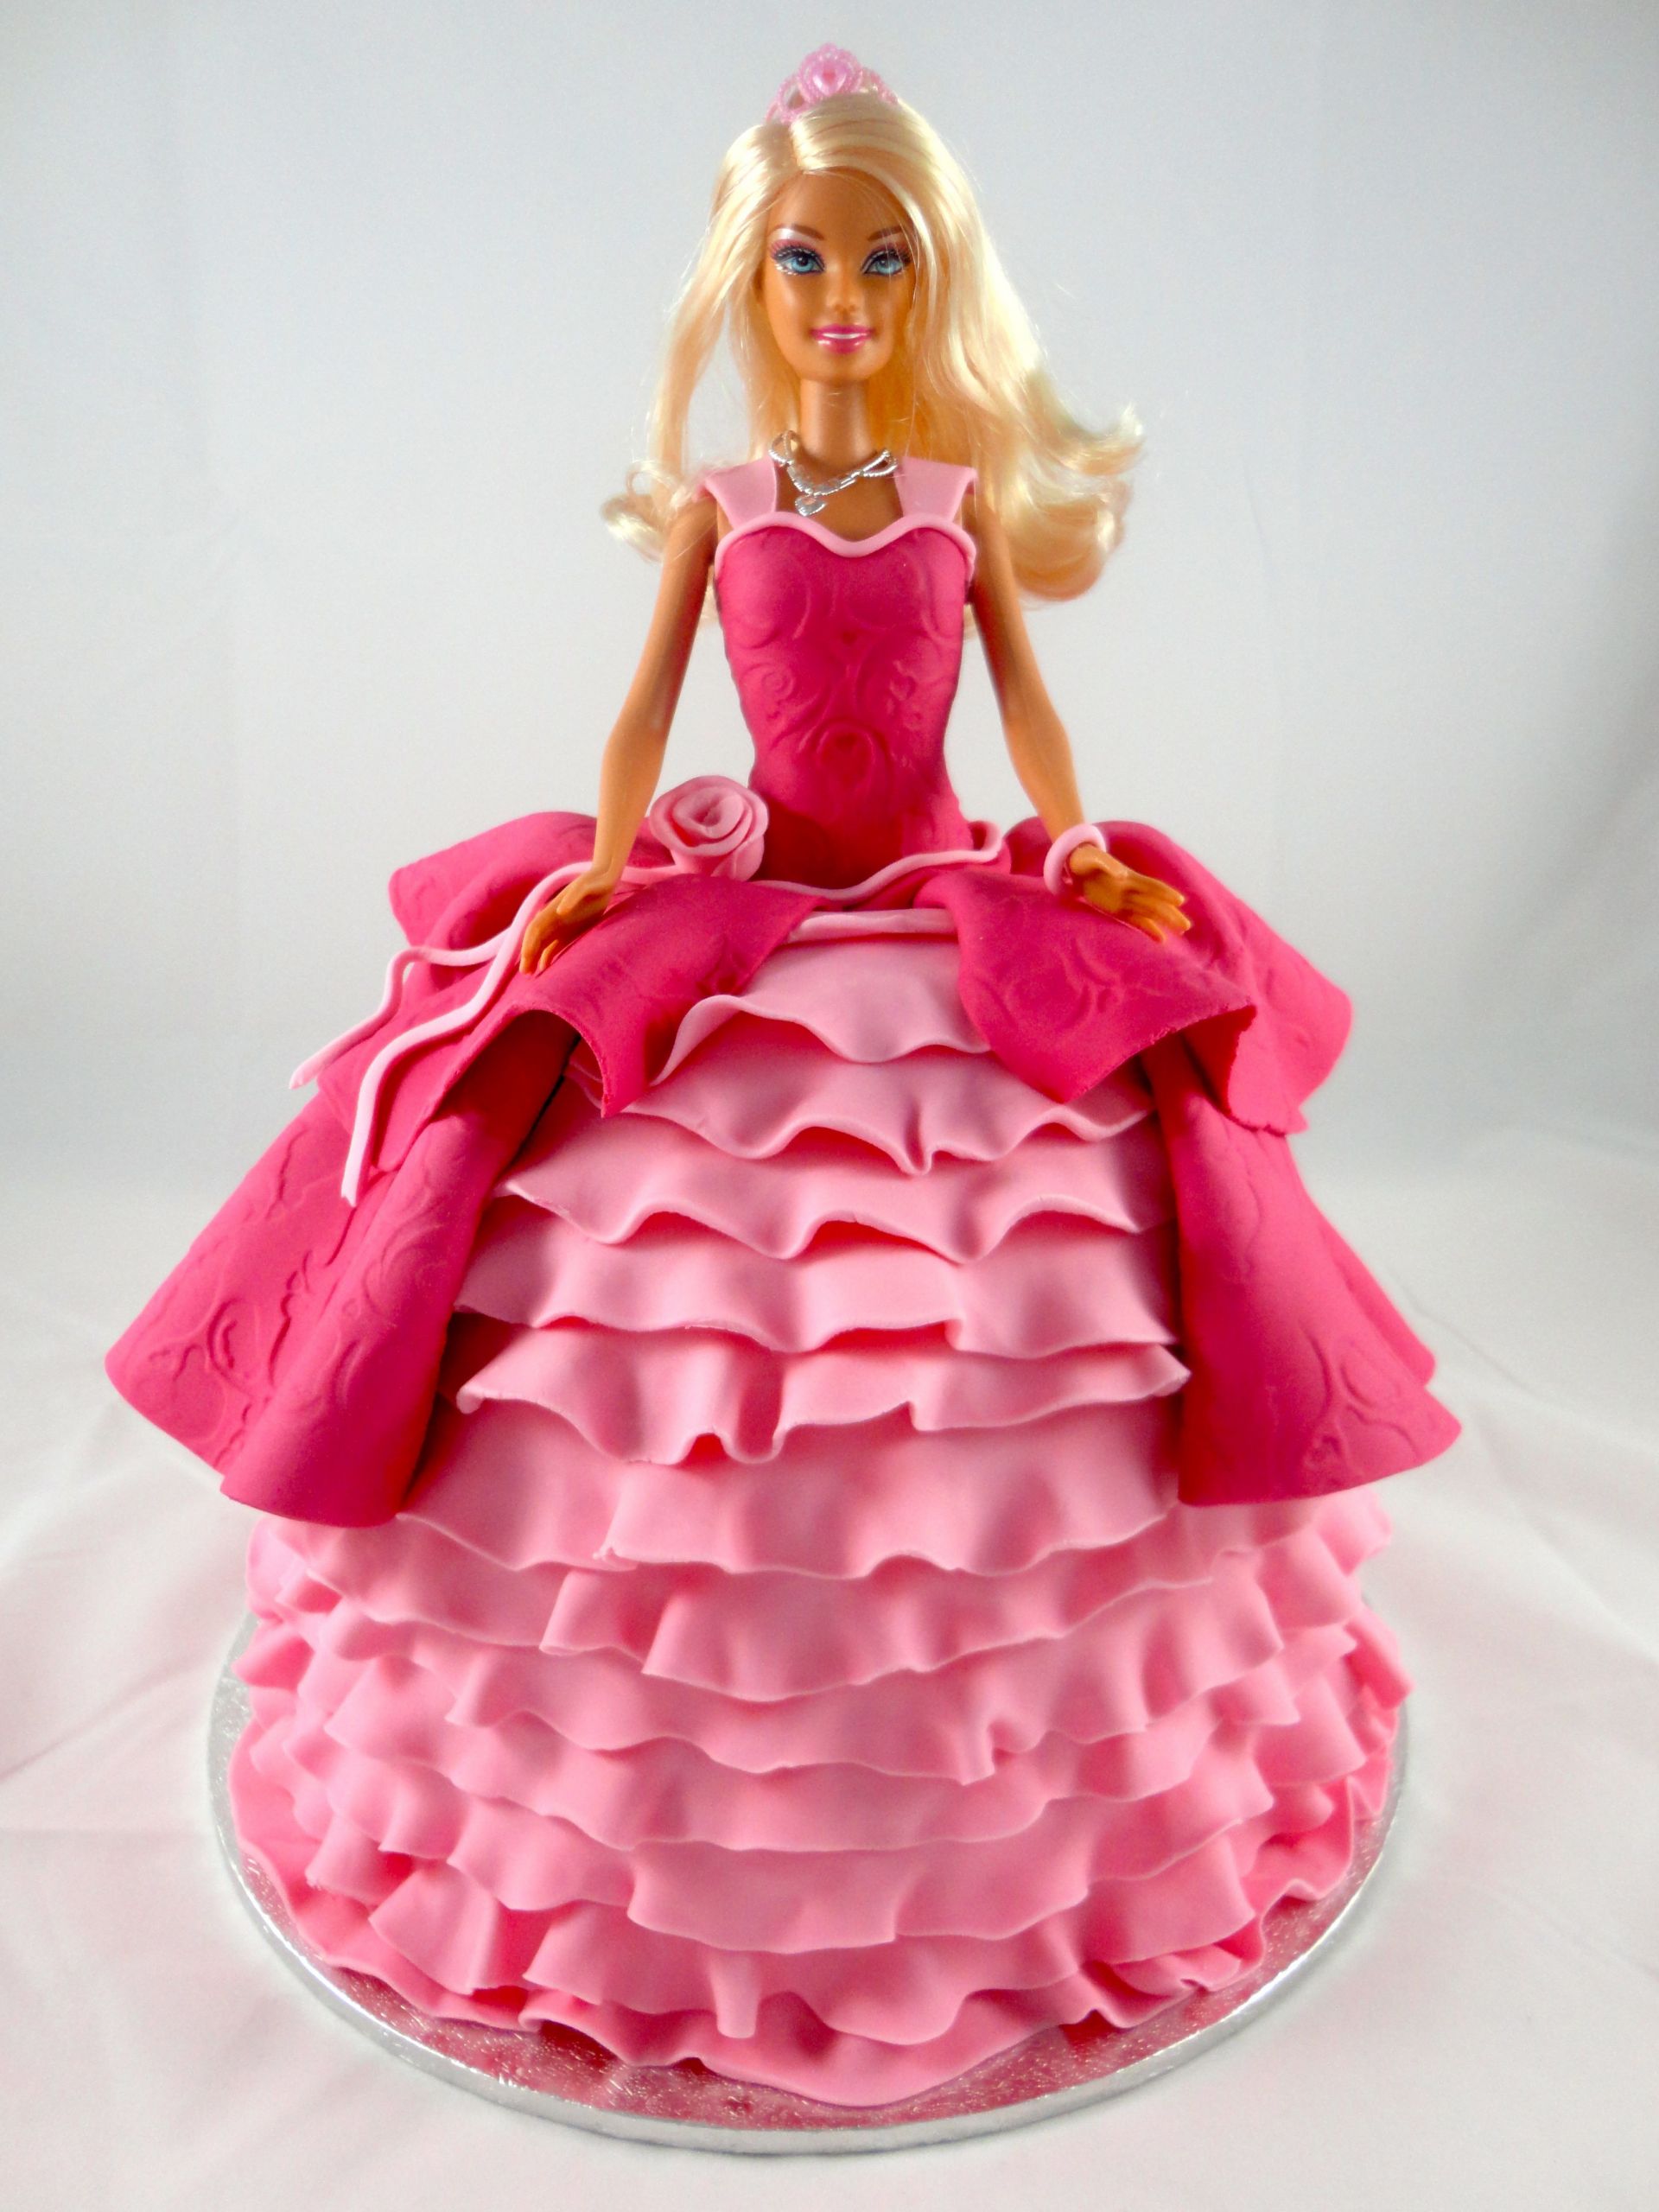 Barbie Birthday Cakes
 How to Make a Barbie Cake for Halloween